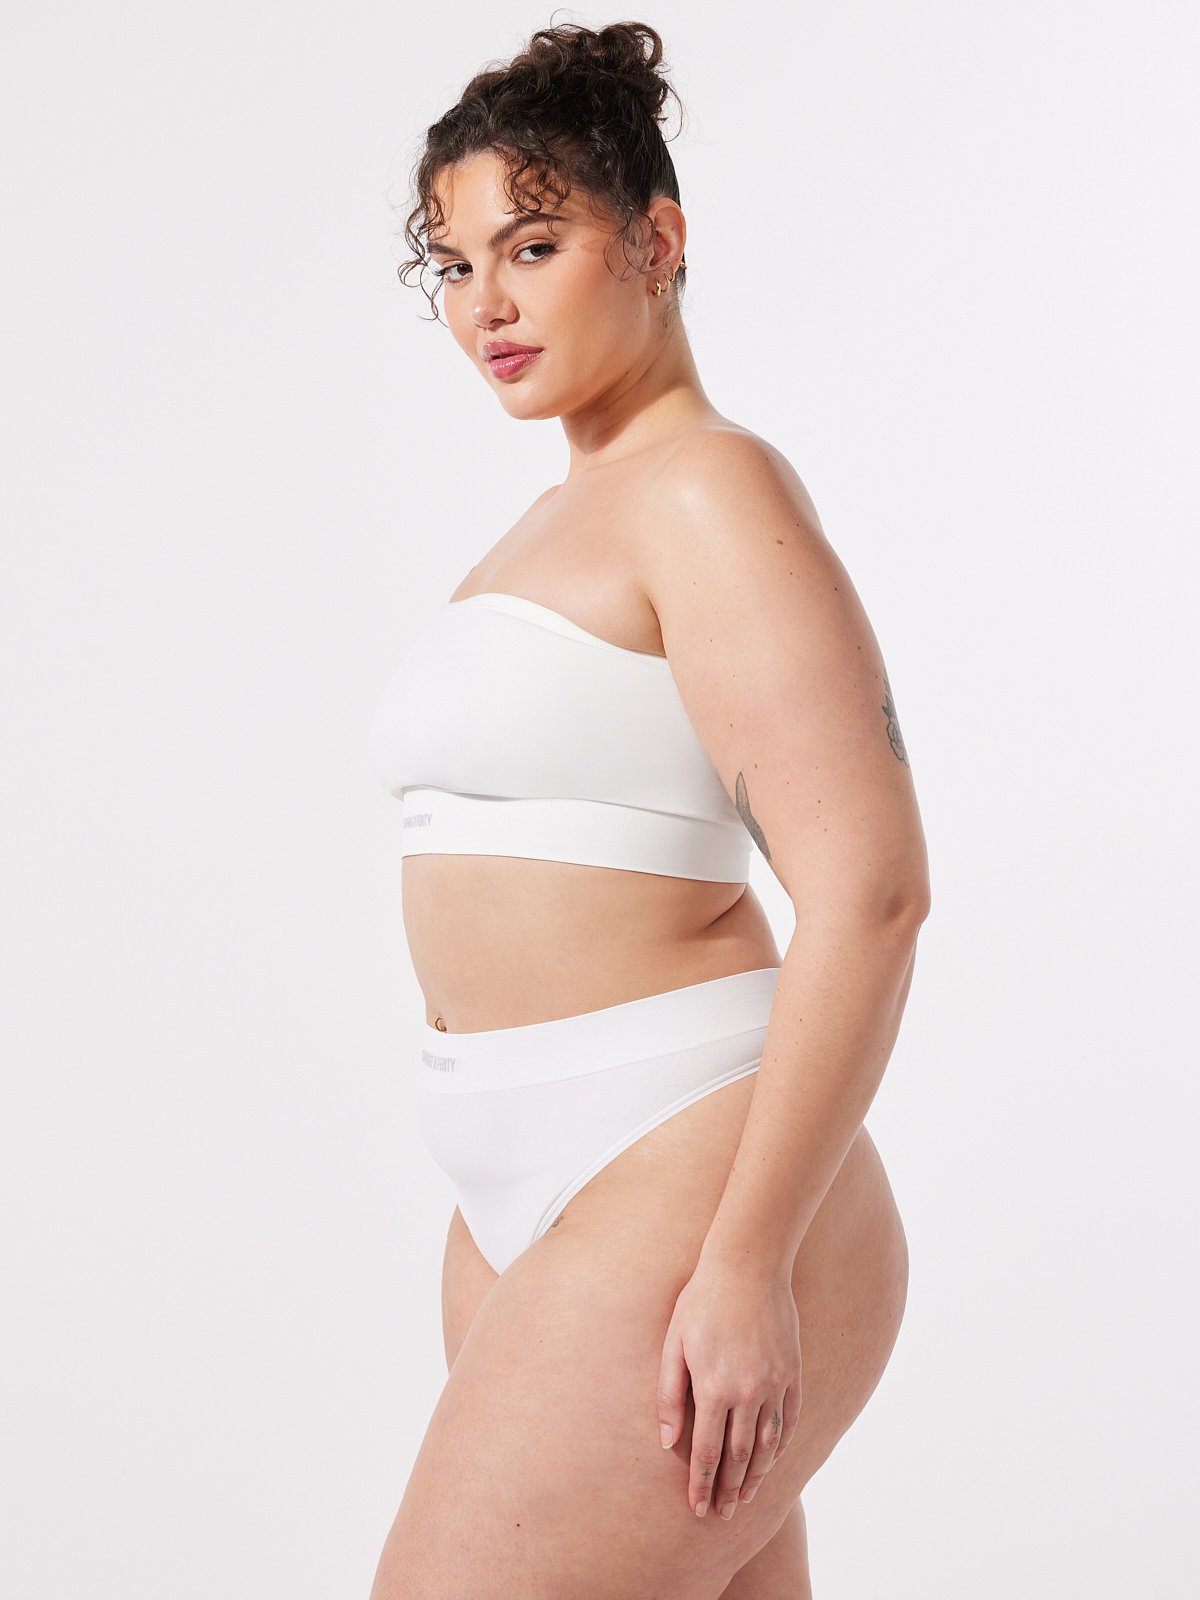 Seamless Bandeau Bralette in White